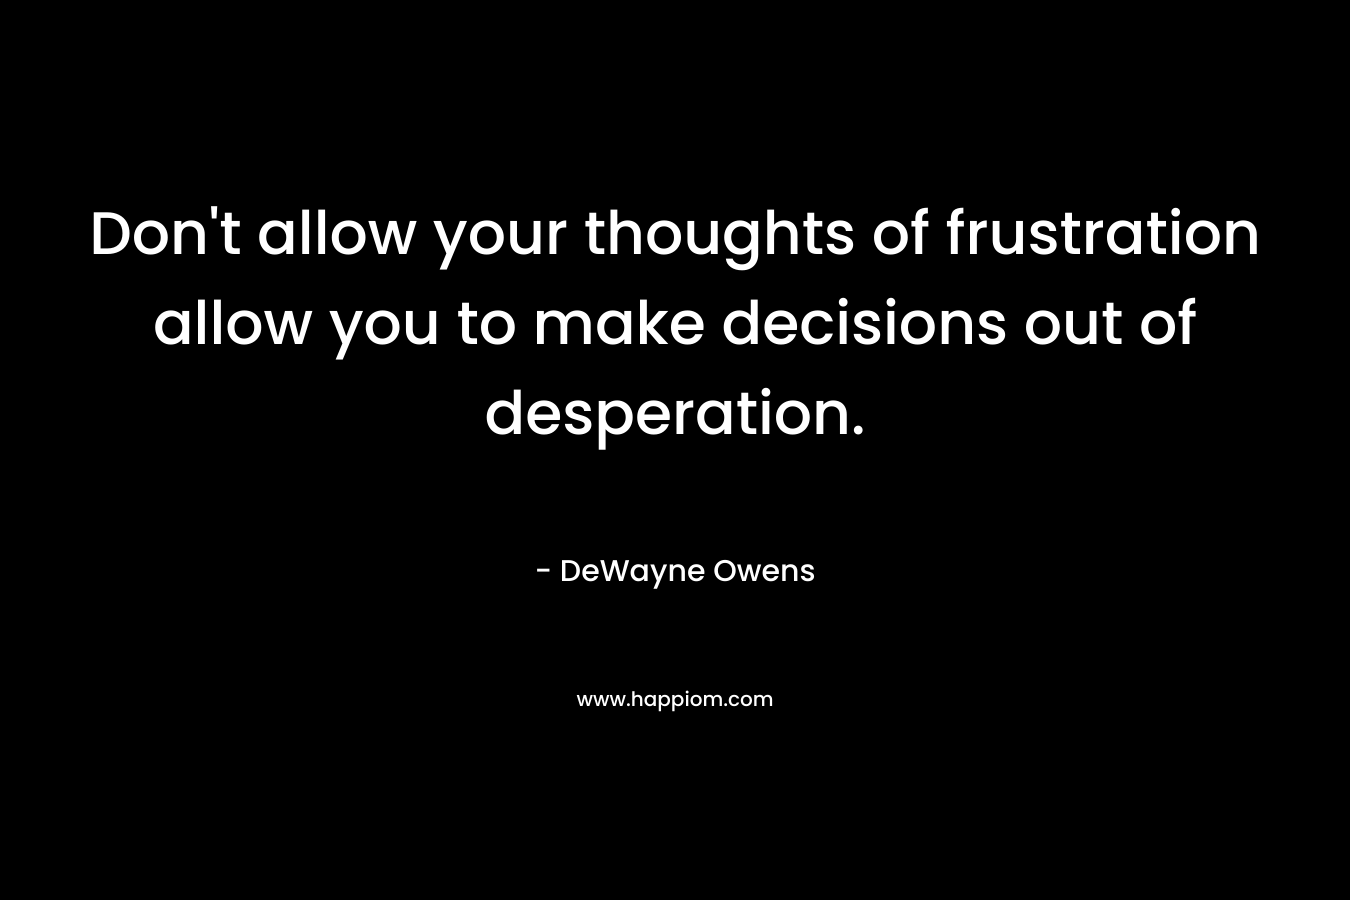 Don't allow your thoughts of frustration allow you to make decisions out of desperation.